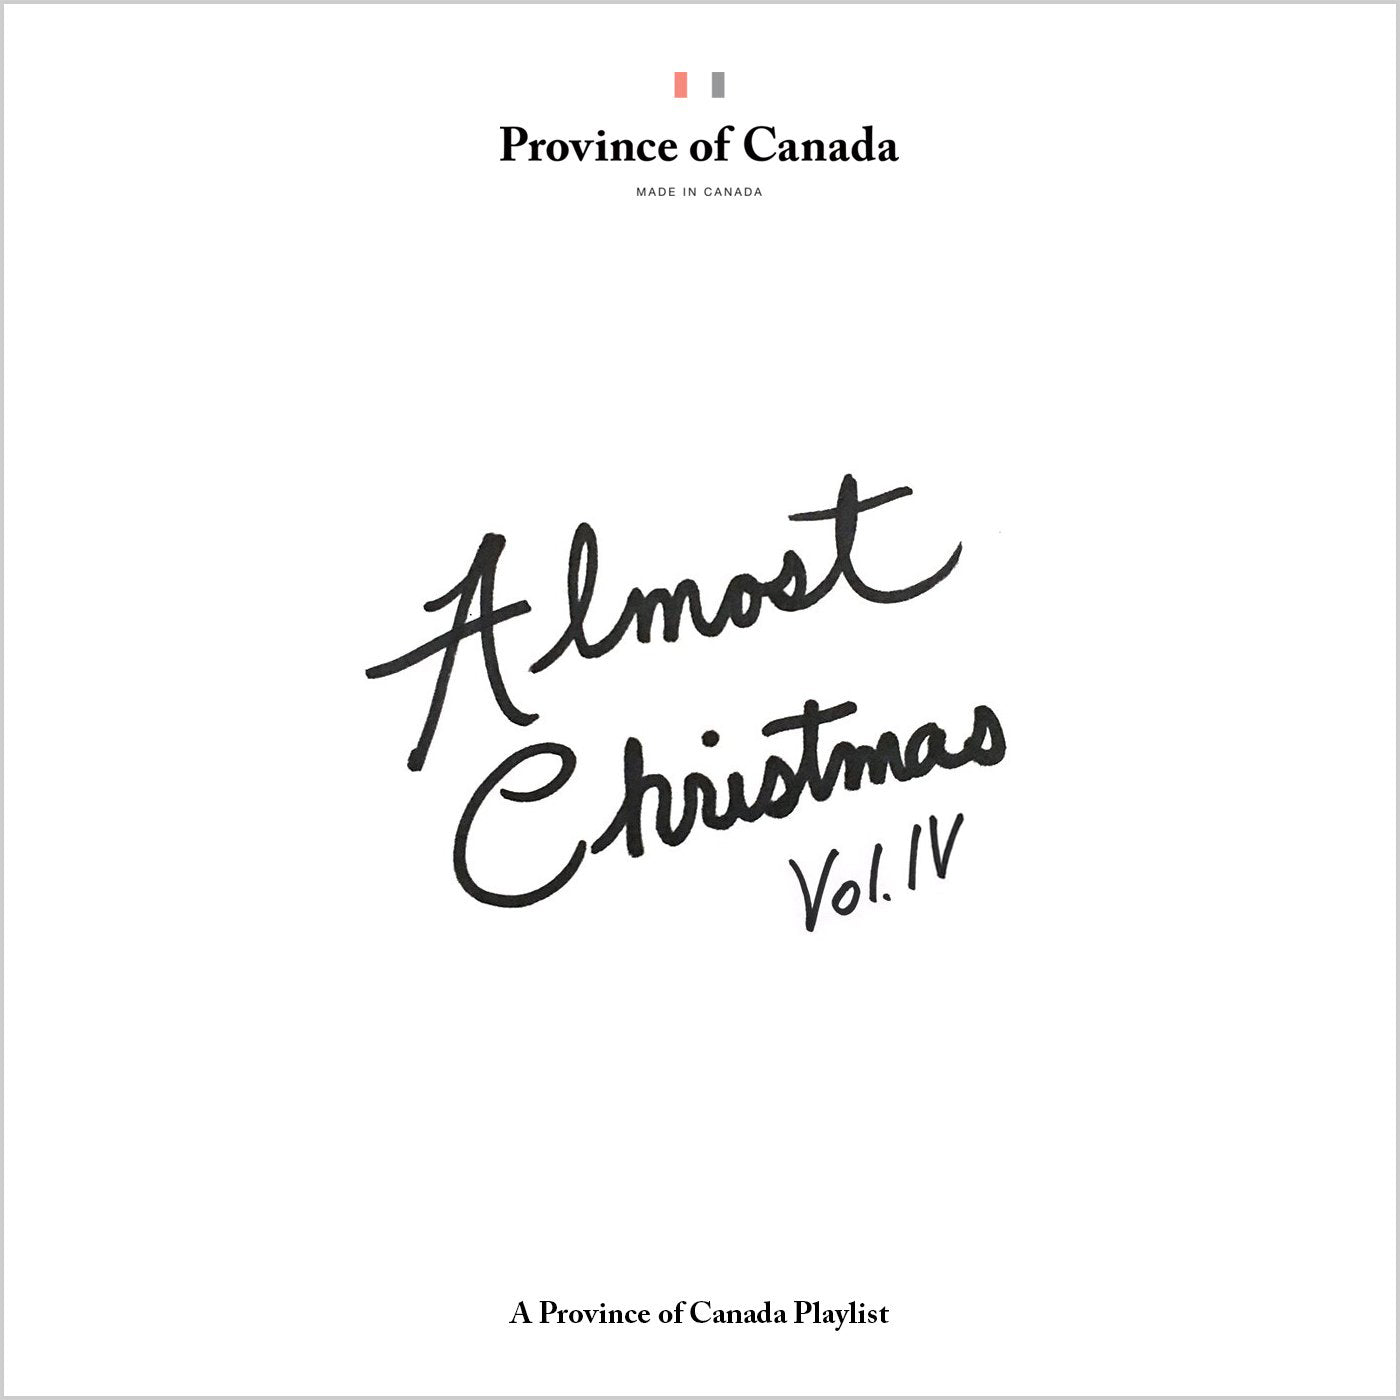 Province of Canada - Almost Christmas Vol. IV